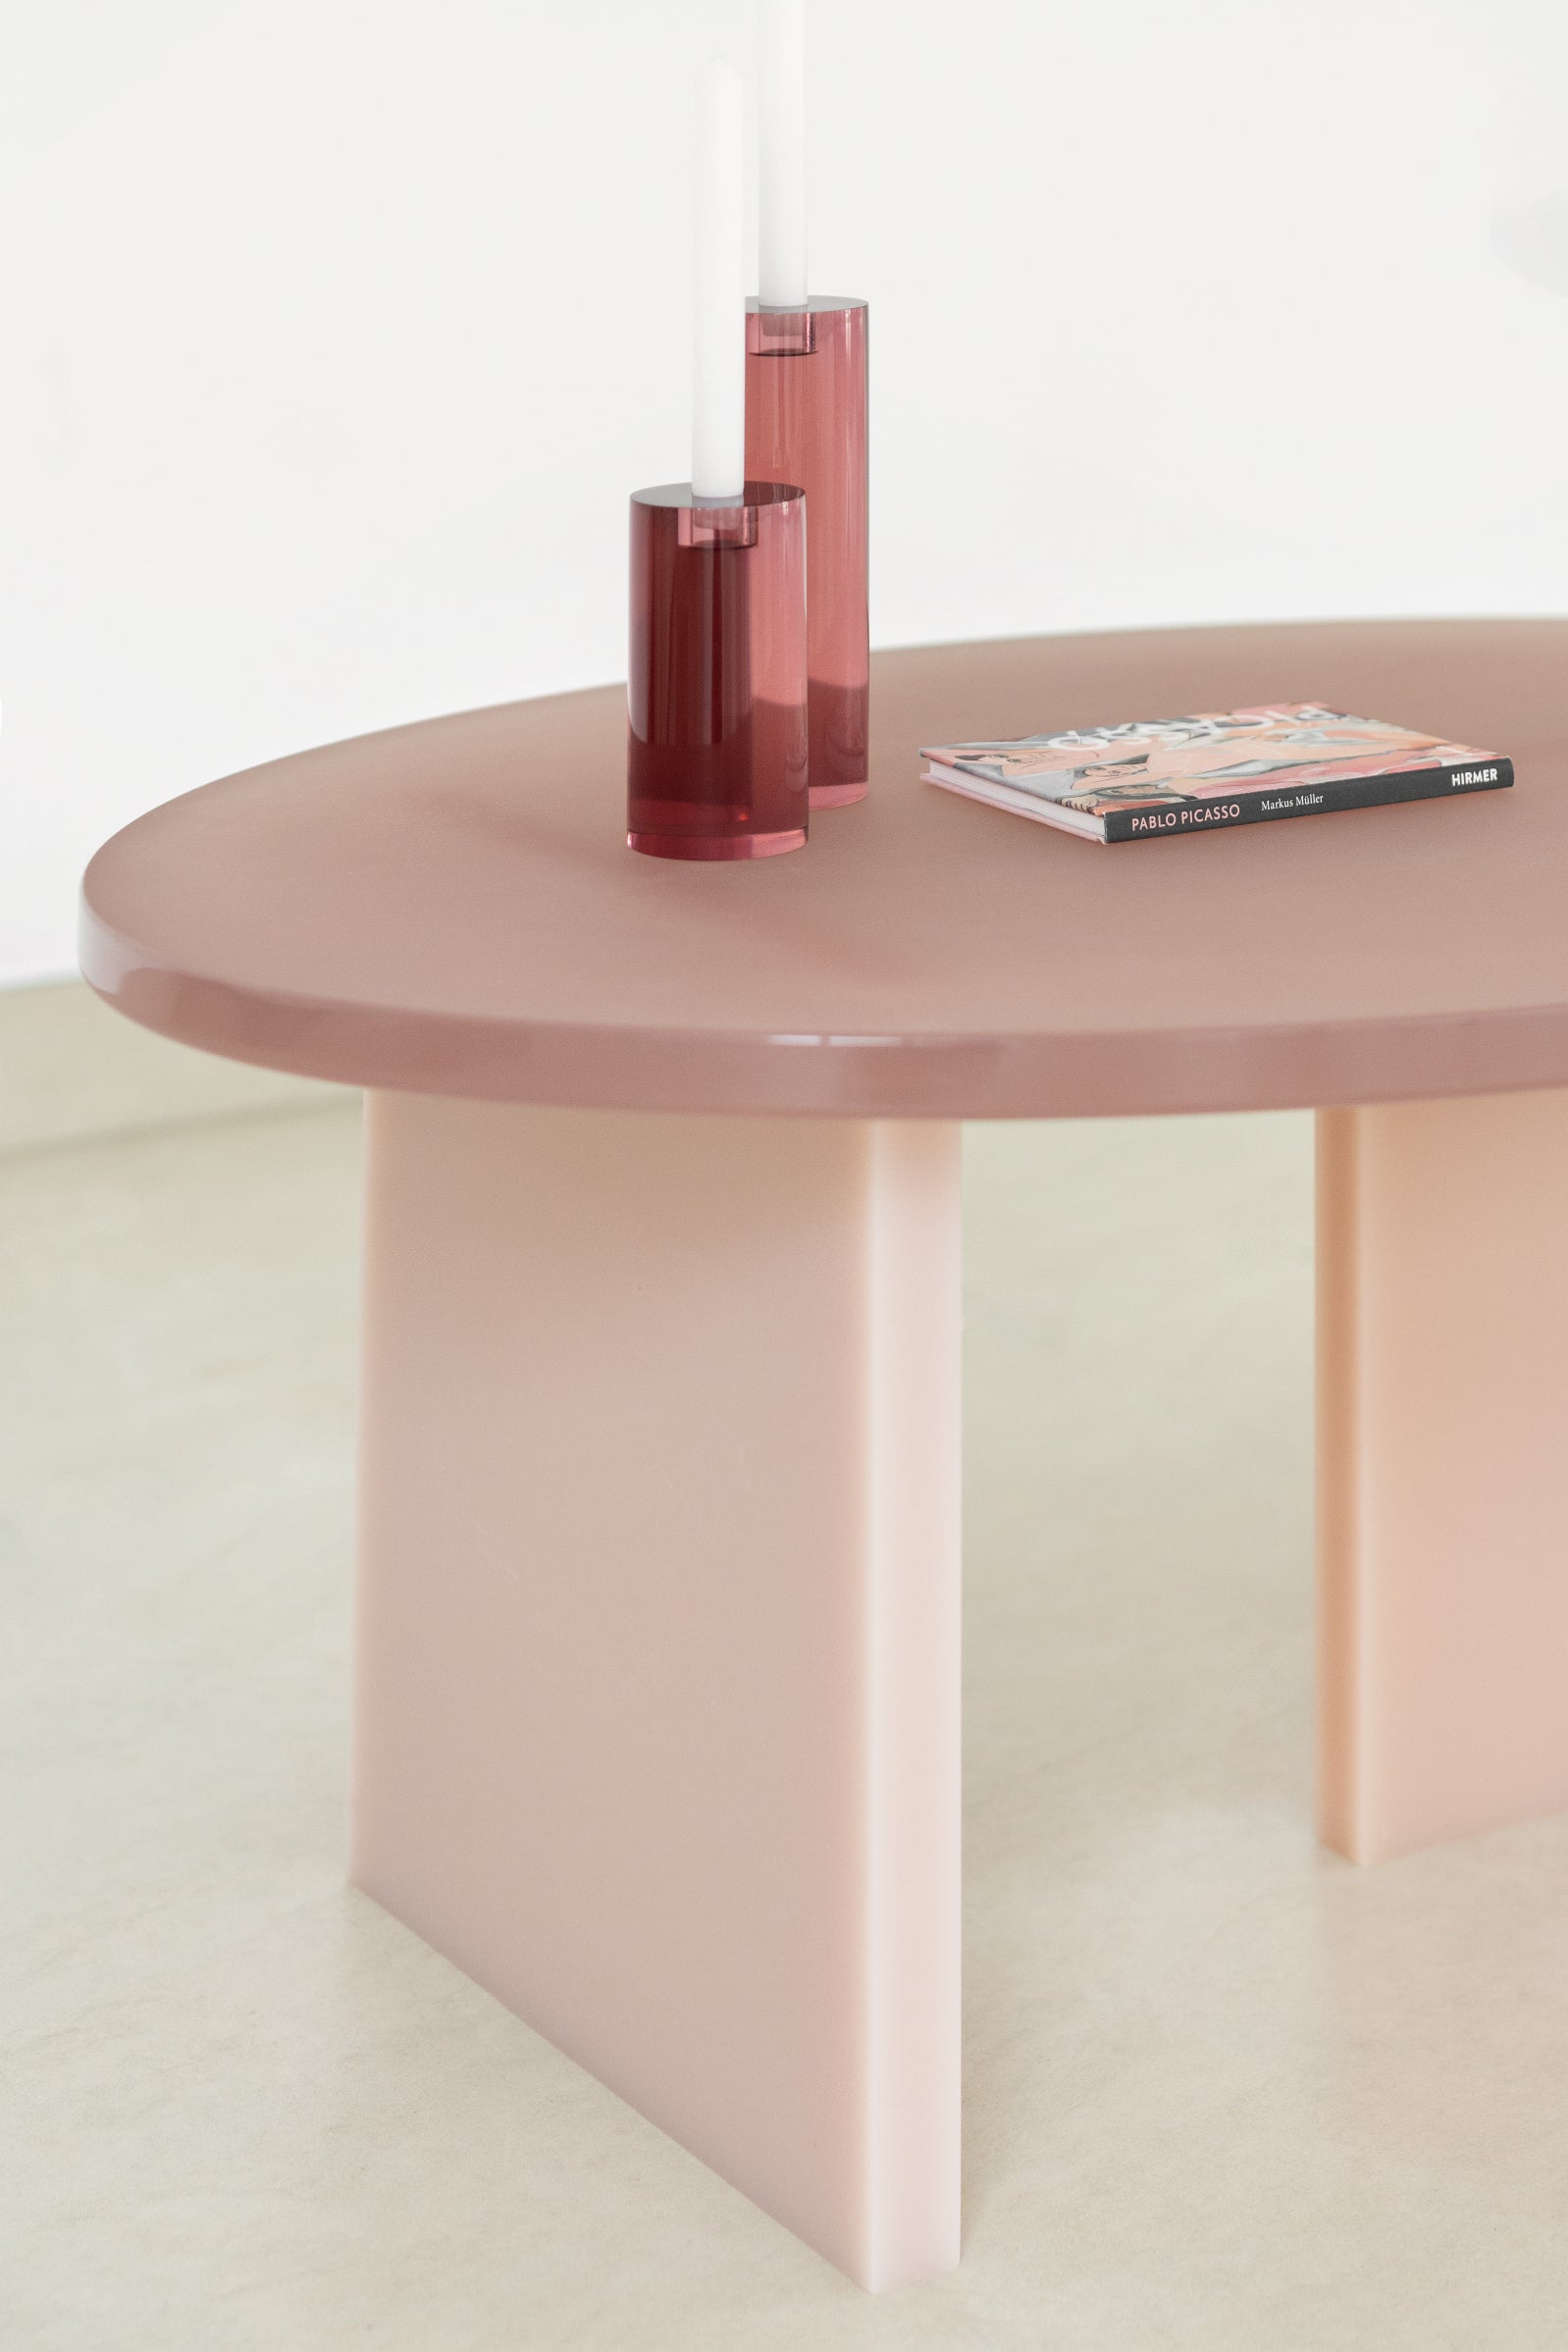 The OVAL resin pink coffee table